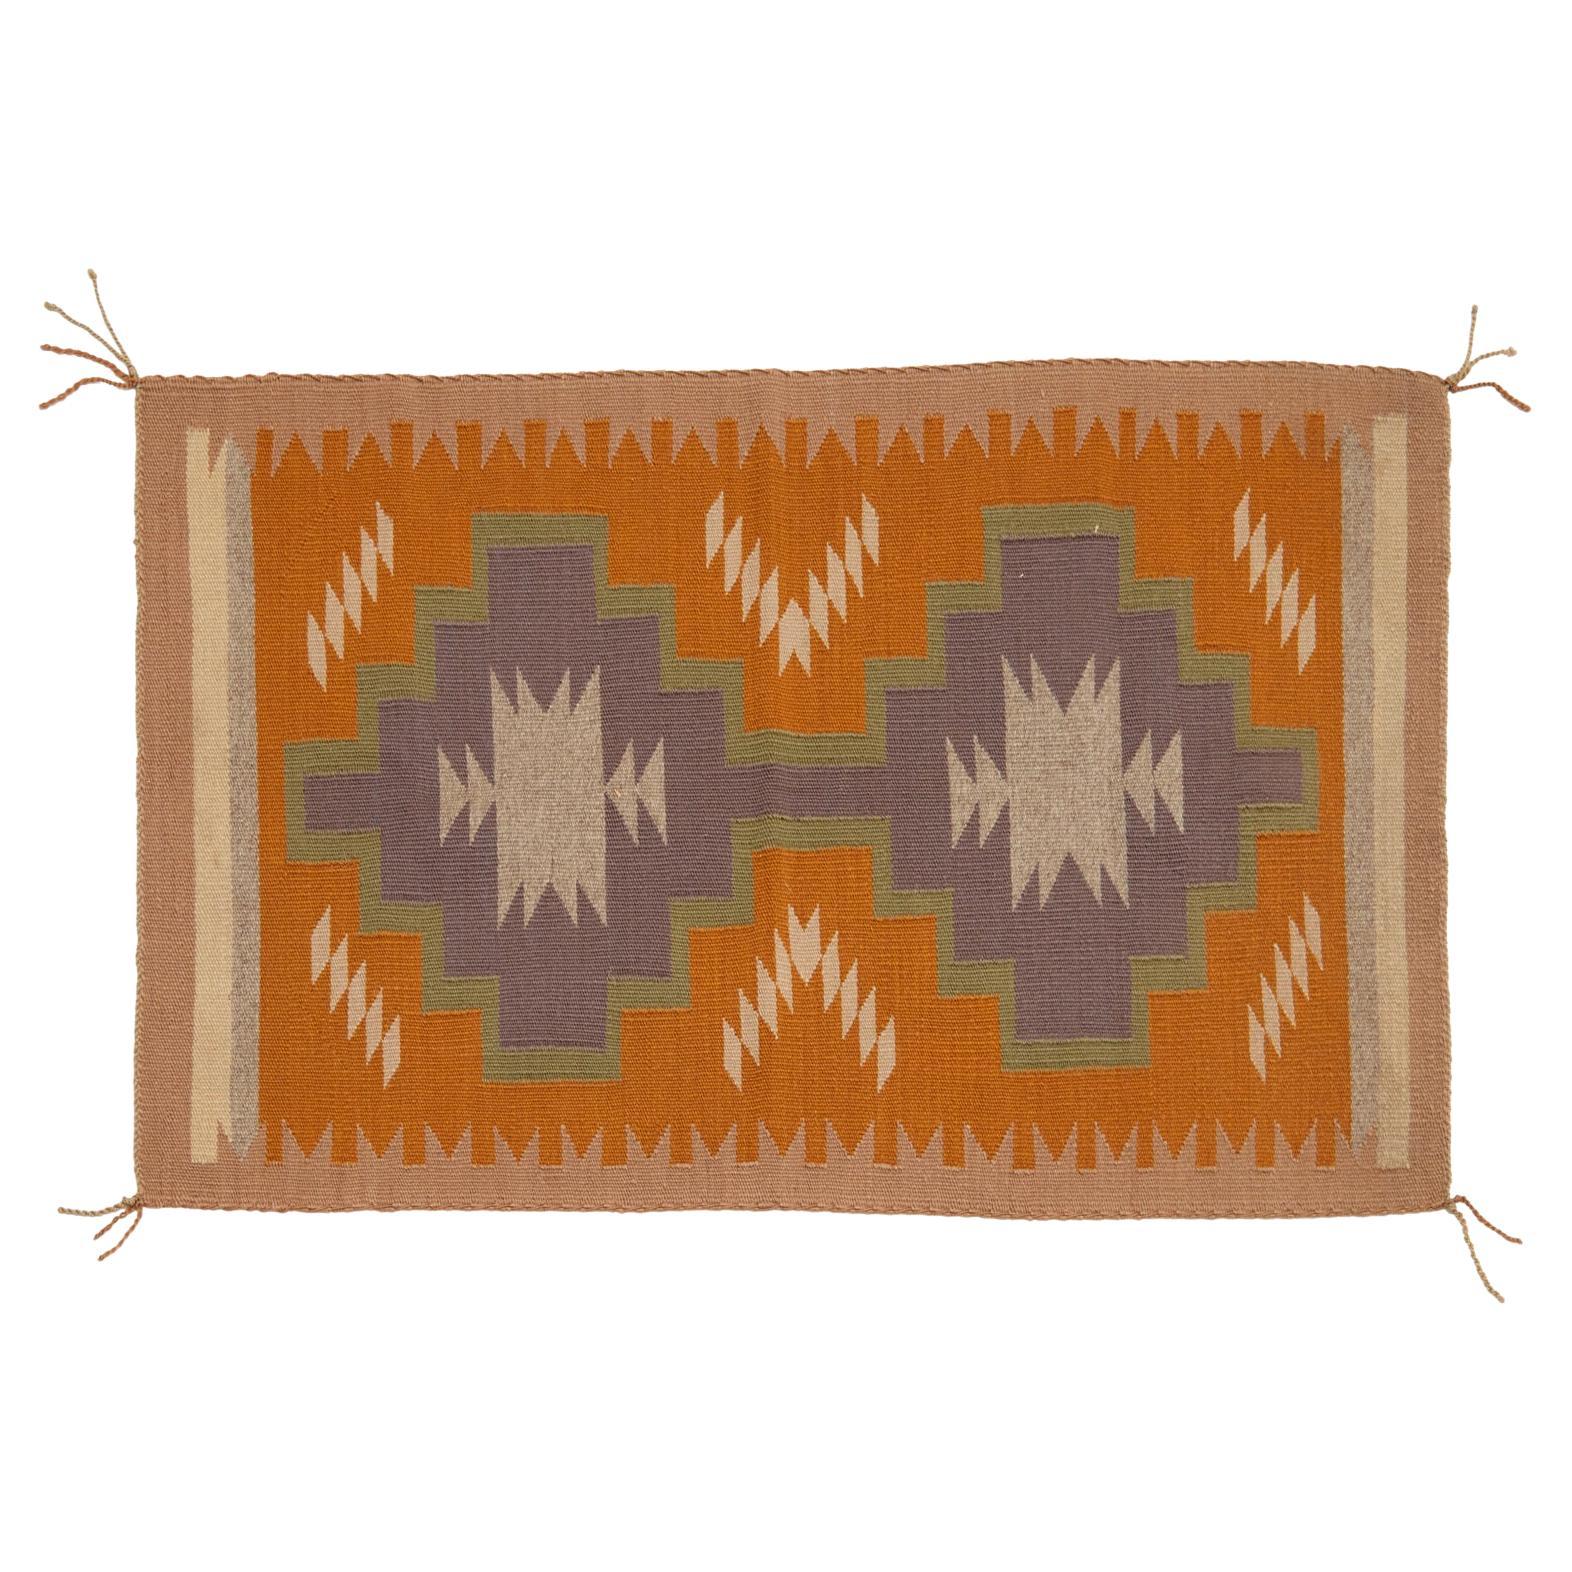 20th C. American Southwest Saddle Blanket with Lazy Lines